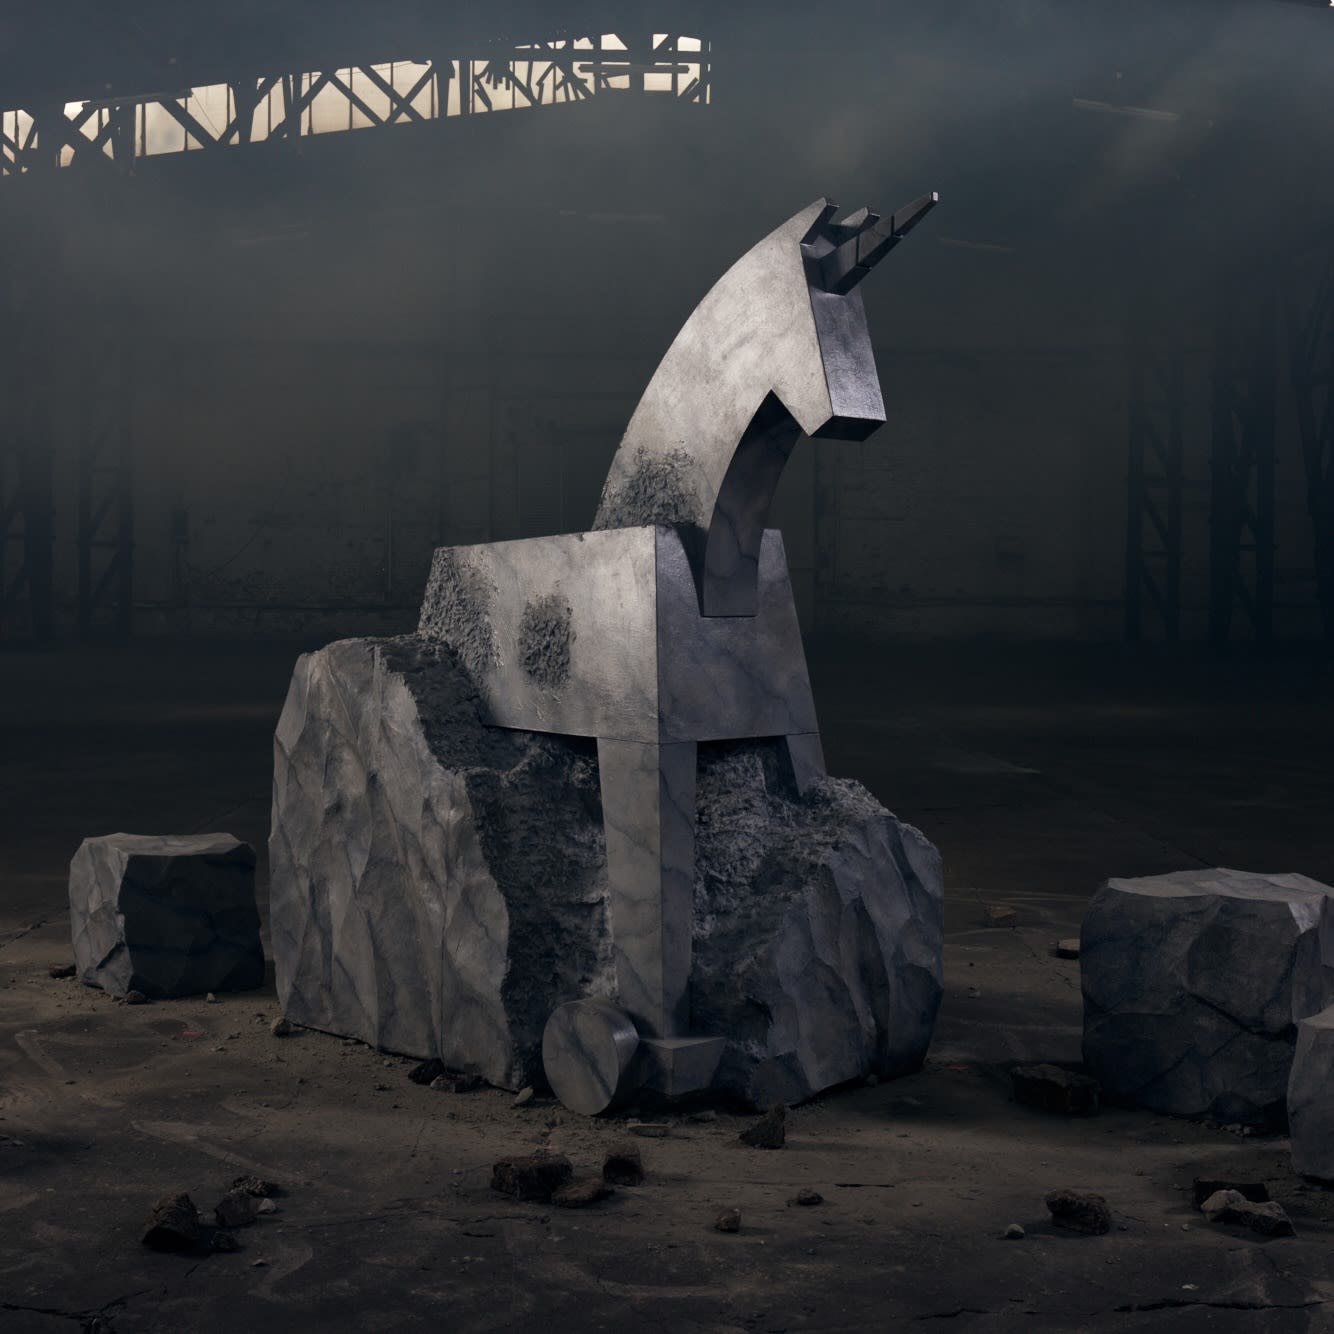 Image showing a sculpture of a Trojan horse, Jung von Matt's brand logo, emerging from a stone-like rock in the middle of a dark room.